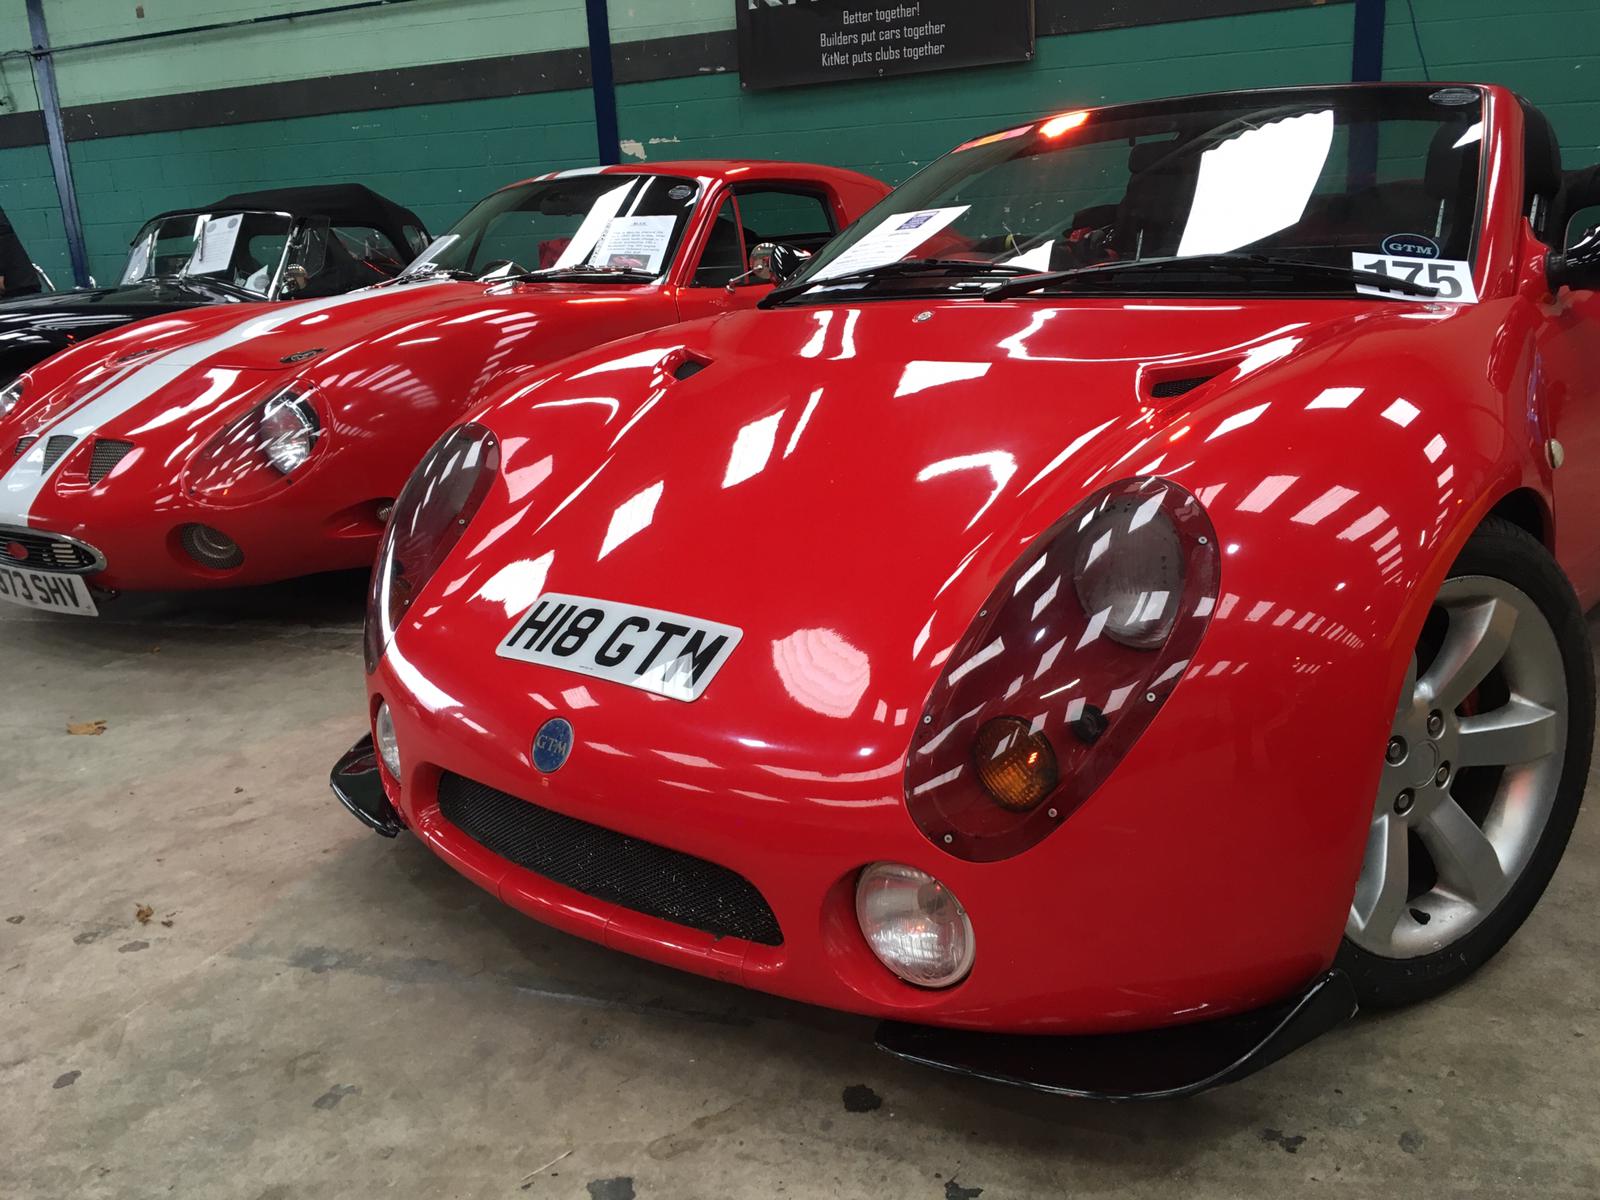 Red GTM cars